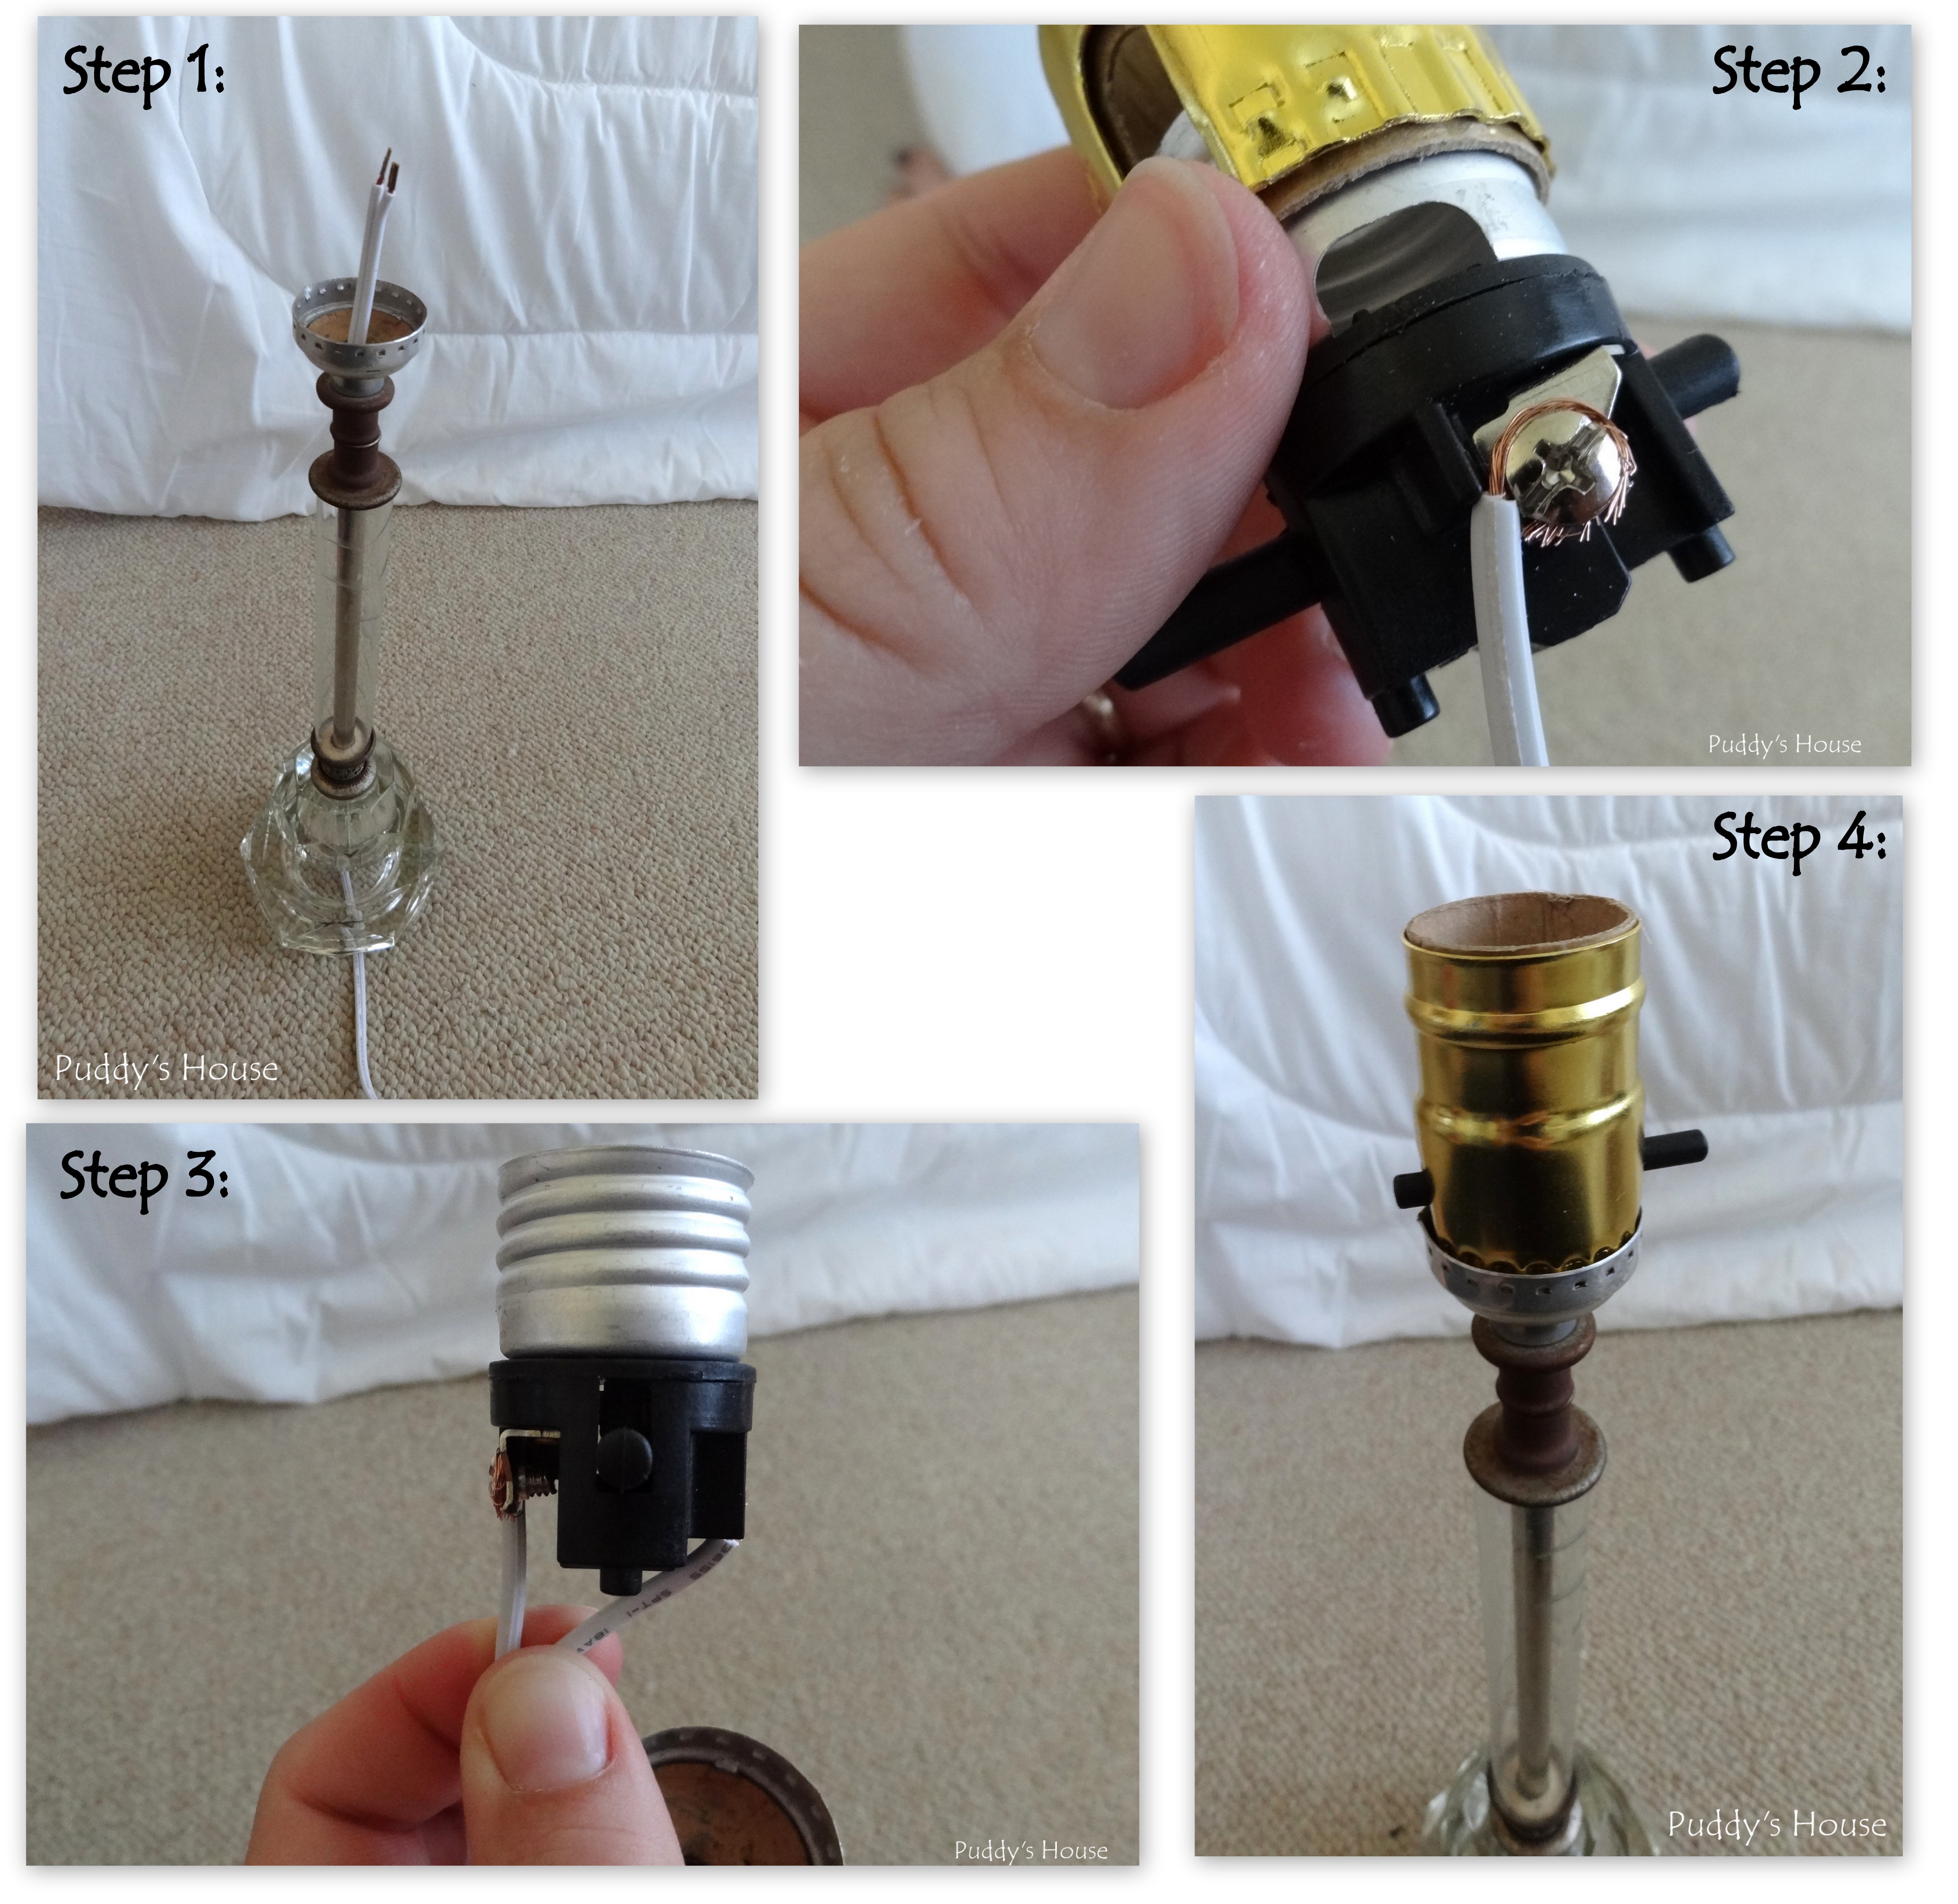 How to rewire a lamp Puddy's House